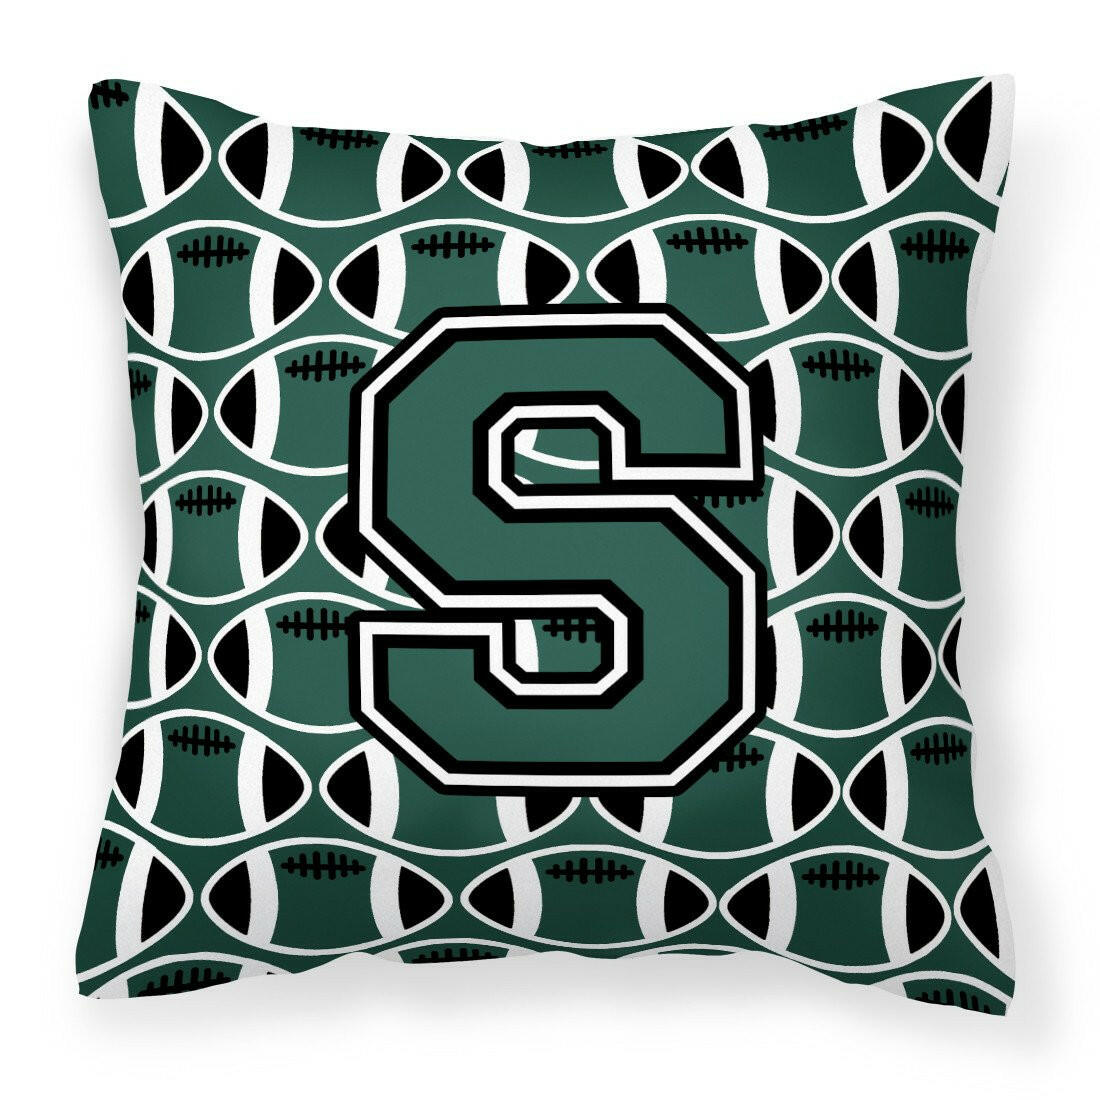 Letter S Football Green and White Fabric Decorative Pillow CJ1071-SPW1414 by Caroline's Treasures